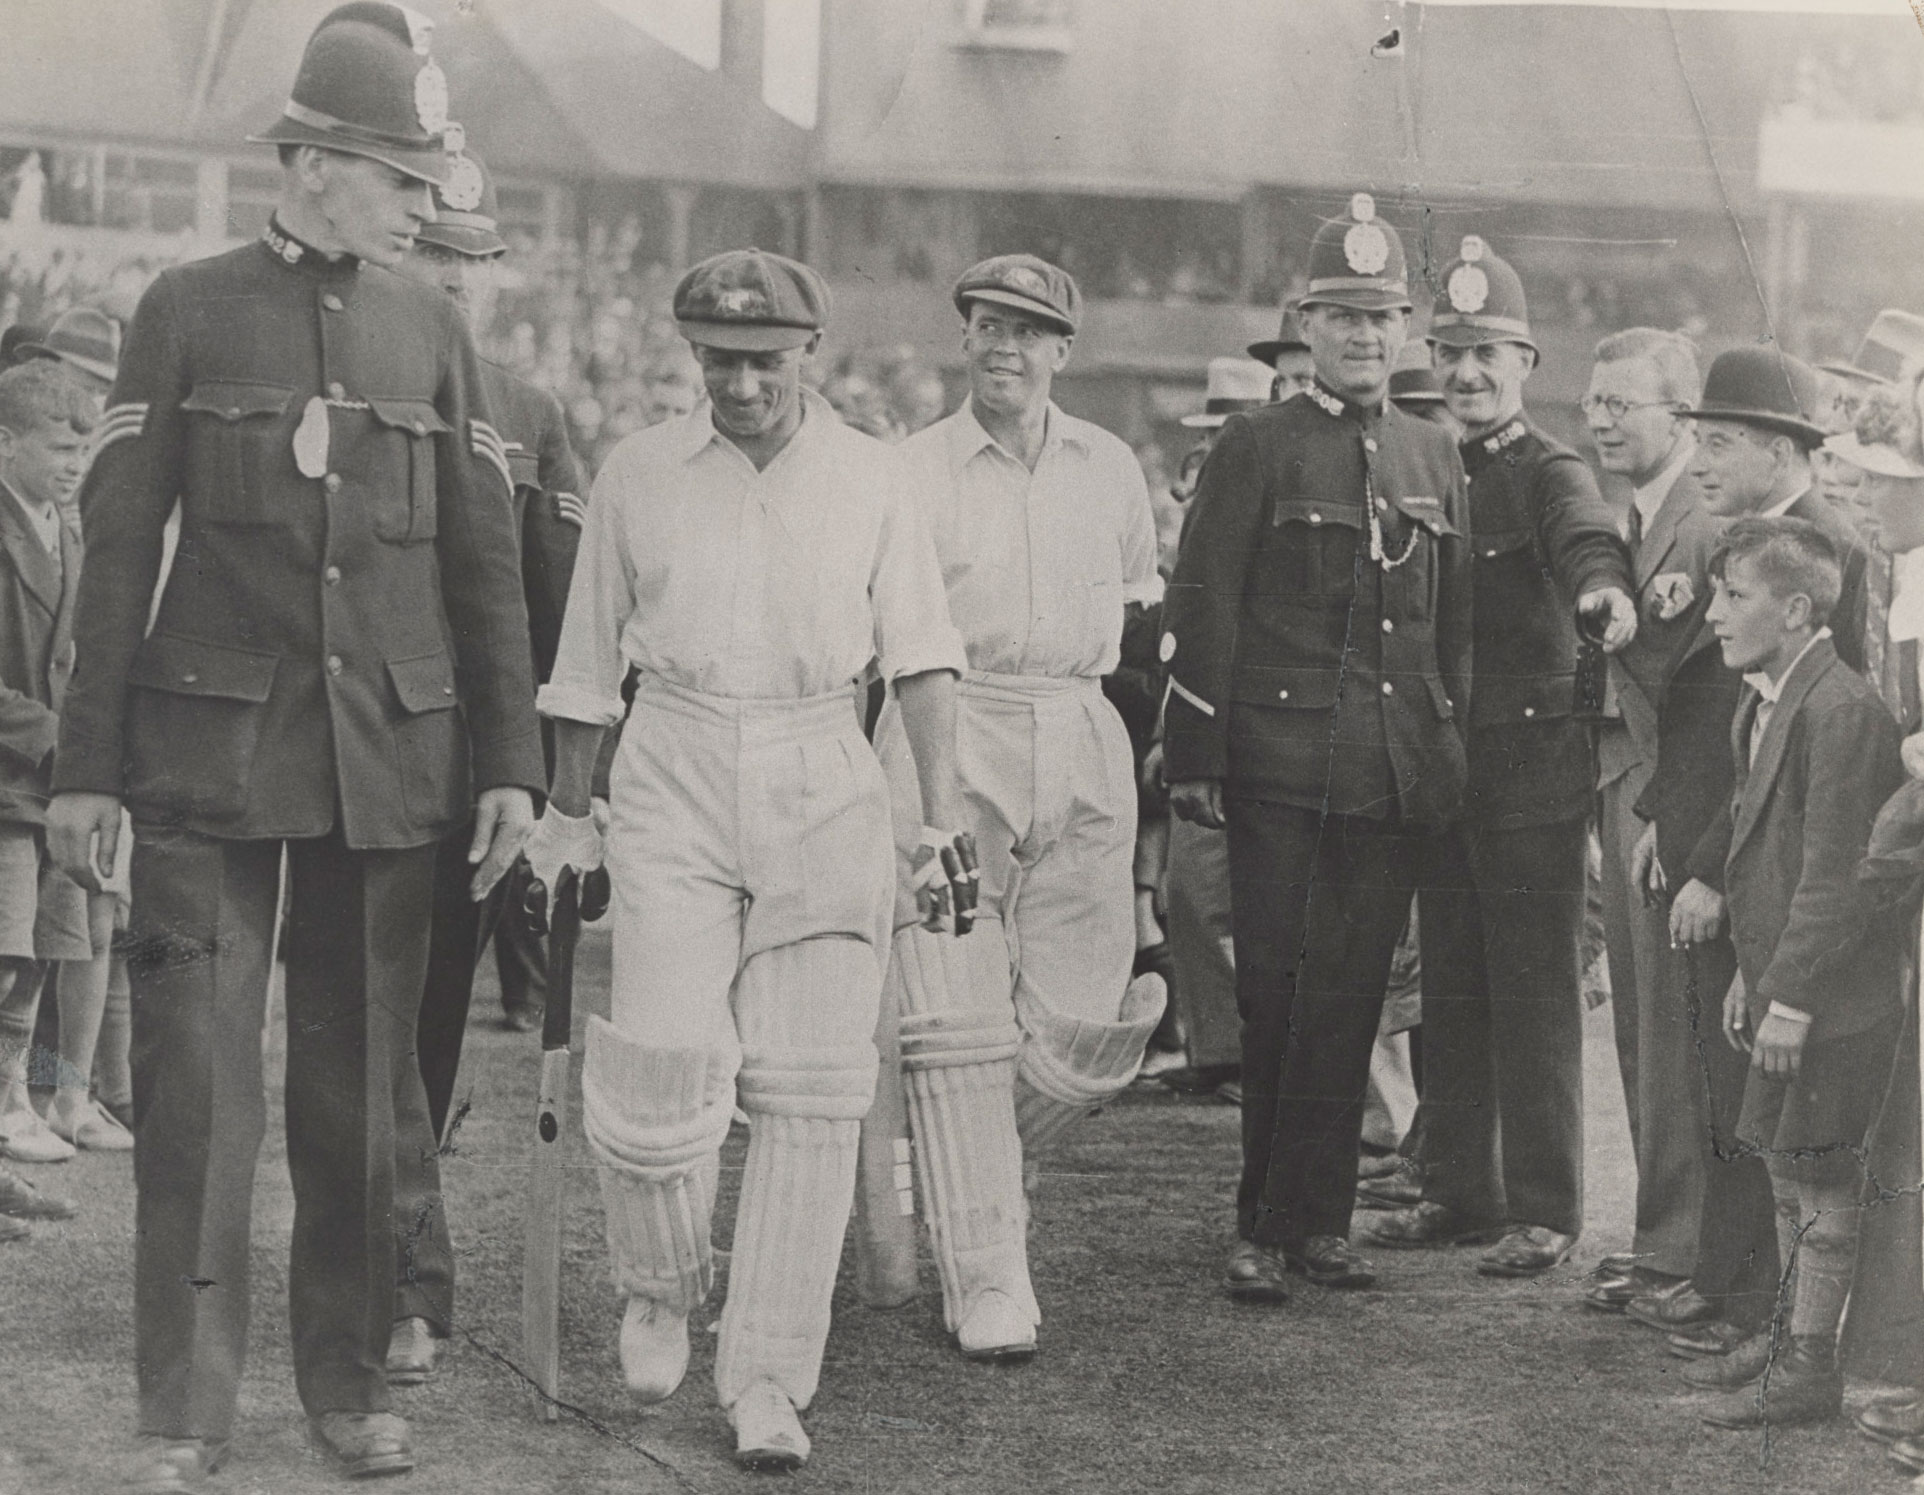 Australian batsmen Don Bradman and Bill Ponsford being escorted from the field by English police, 1934.